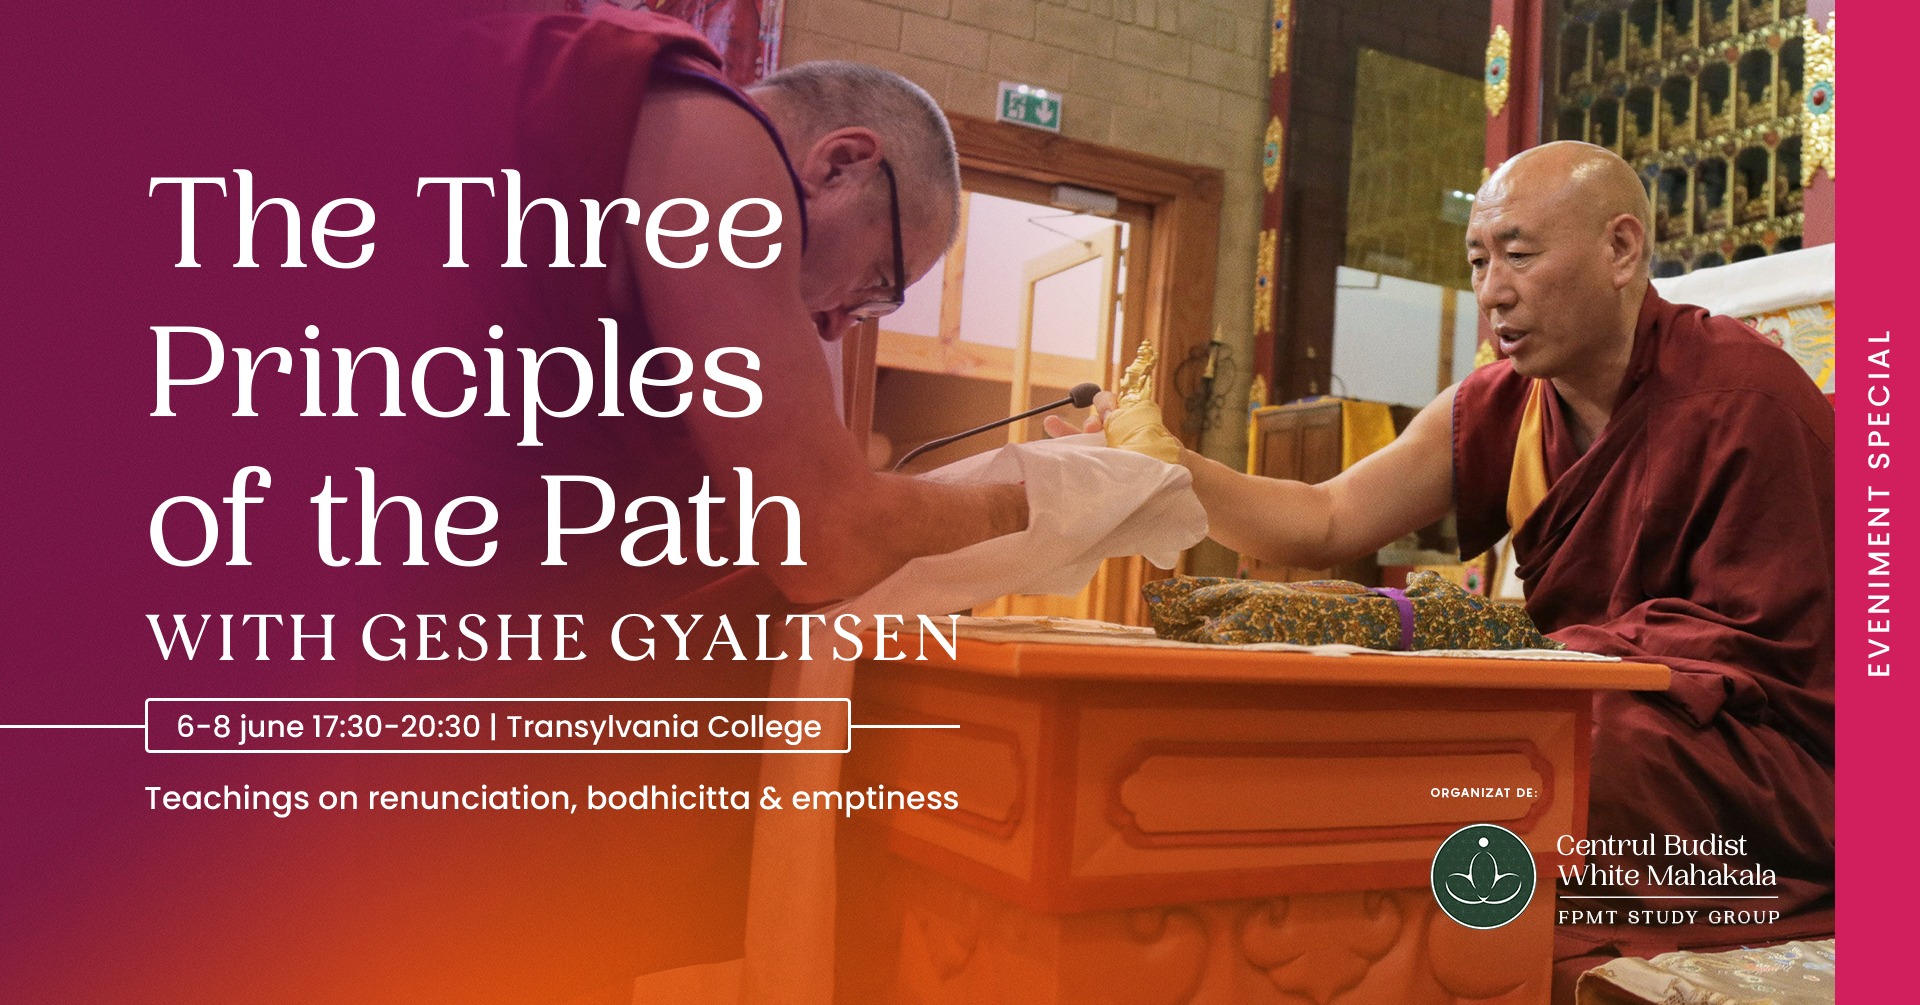 The Three Principles of the Path with Geshe Gyaltsen